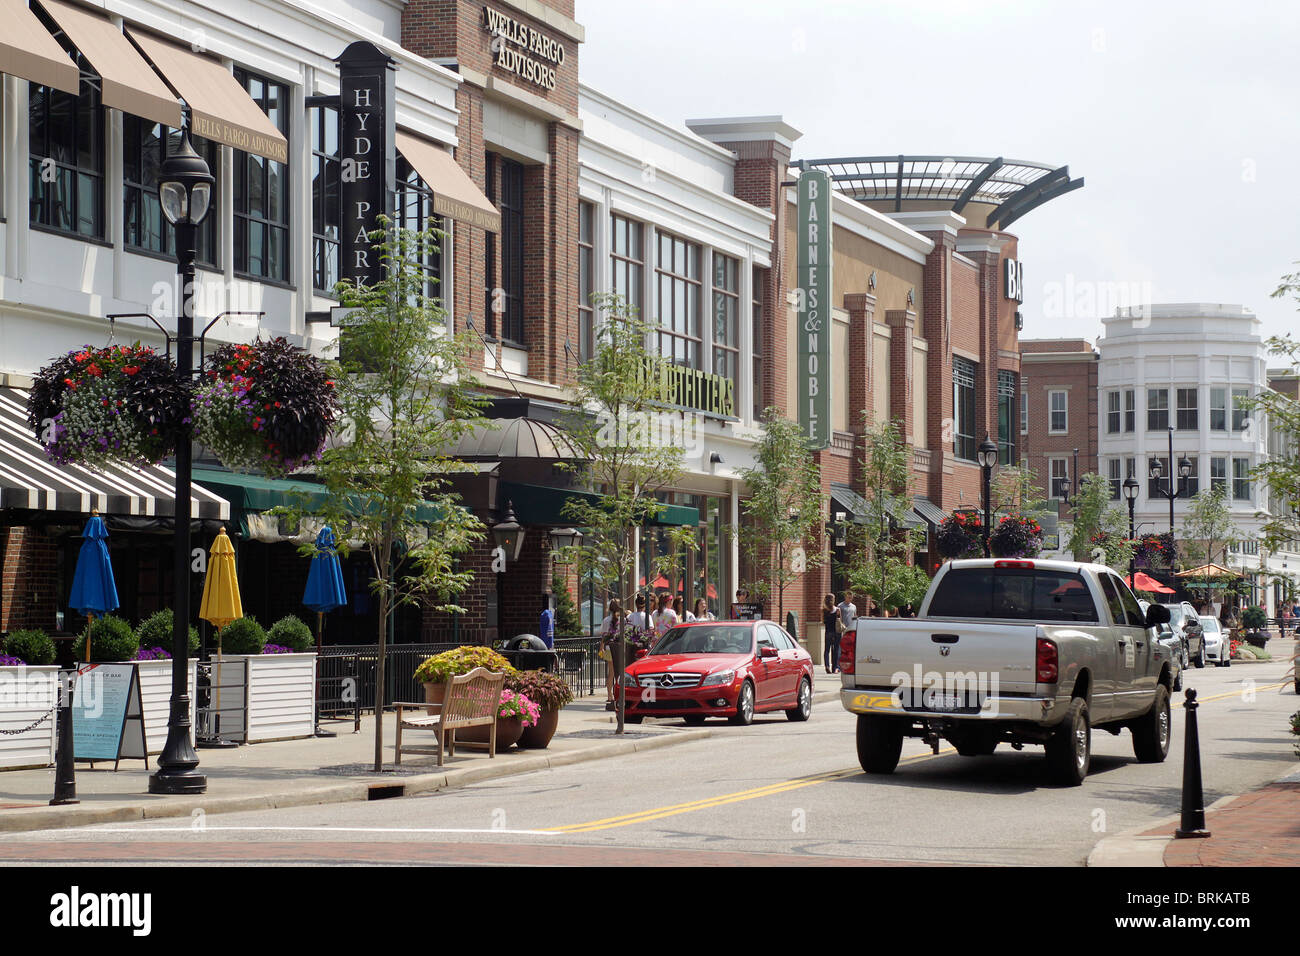 Crocker Park outdoor outlet mall - Metro Cleveland Ohio Stock Photo: 31773067 - Alamy